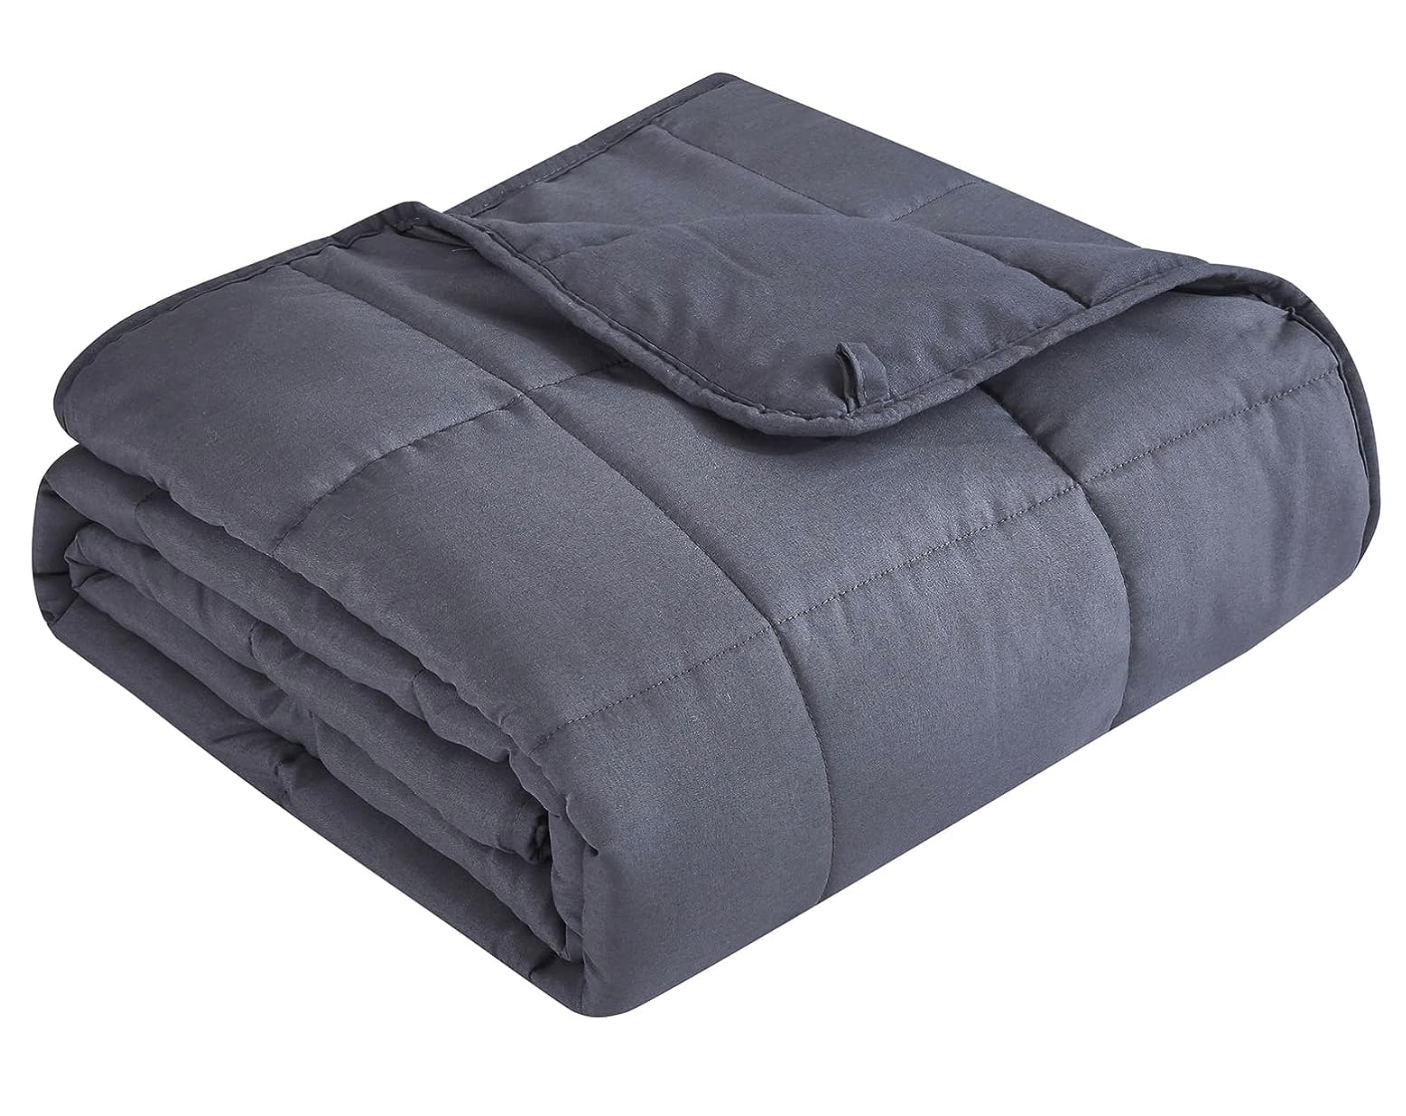 Topcee Weighted Blanket